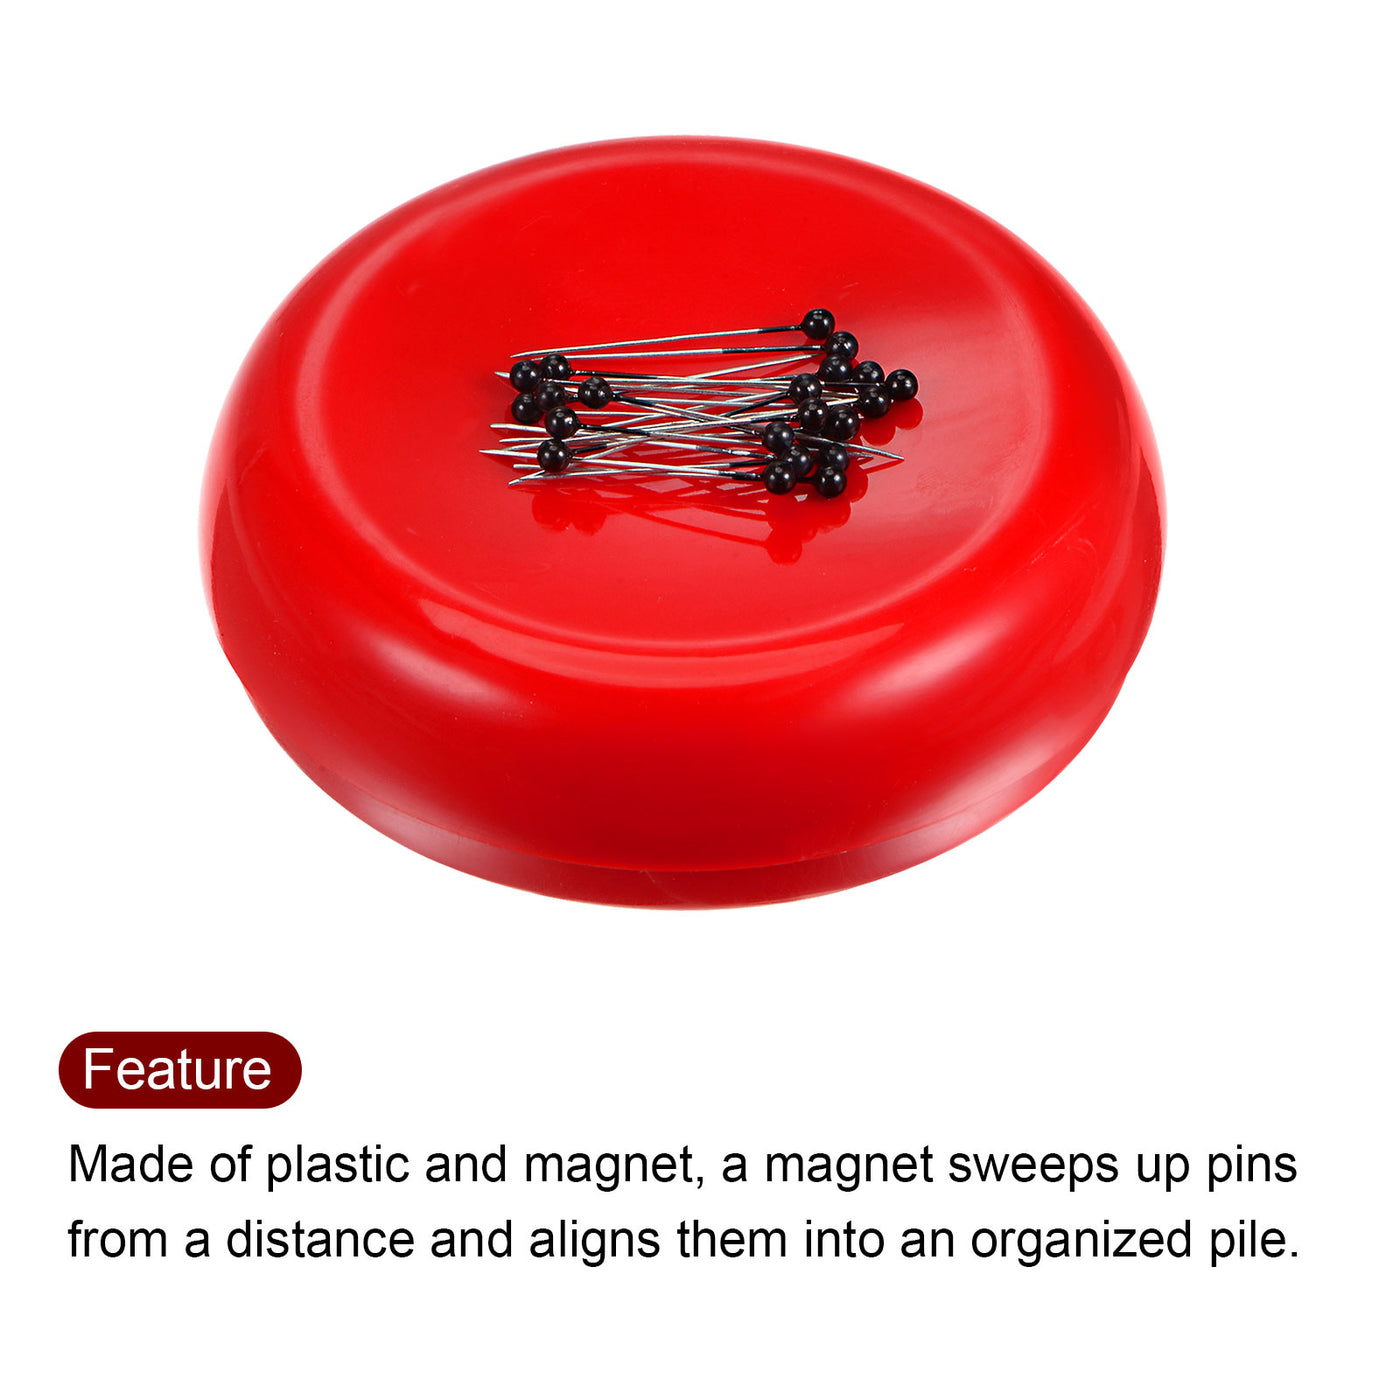 Harfington Magnetic Pin Cushion Round Shape with 100pcs Black Plastic Head Pins, Red